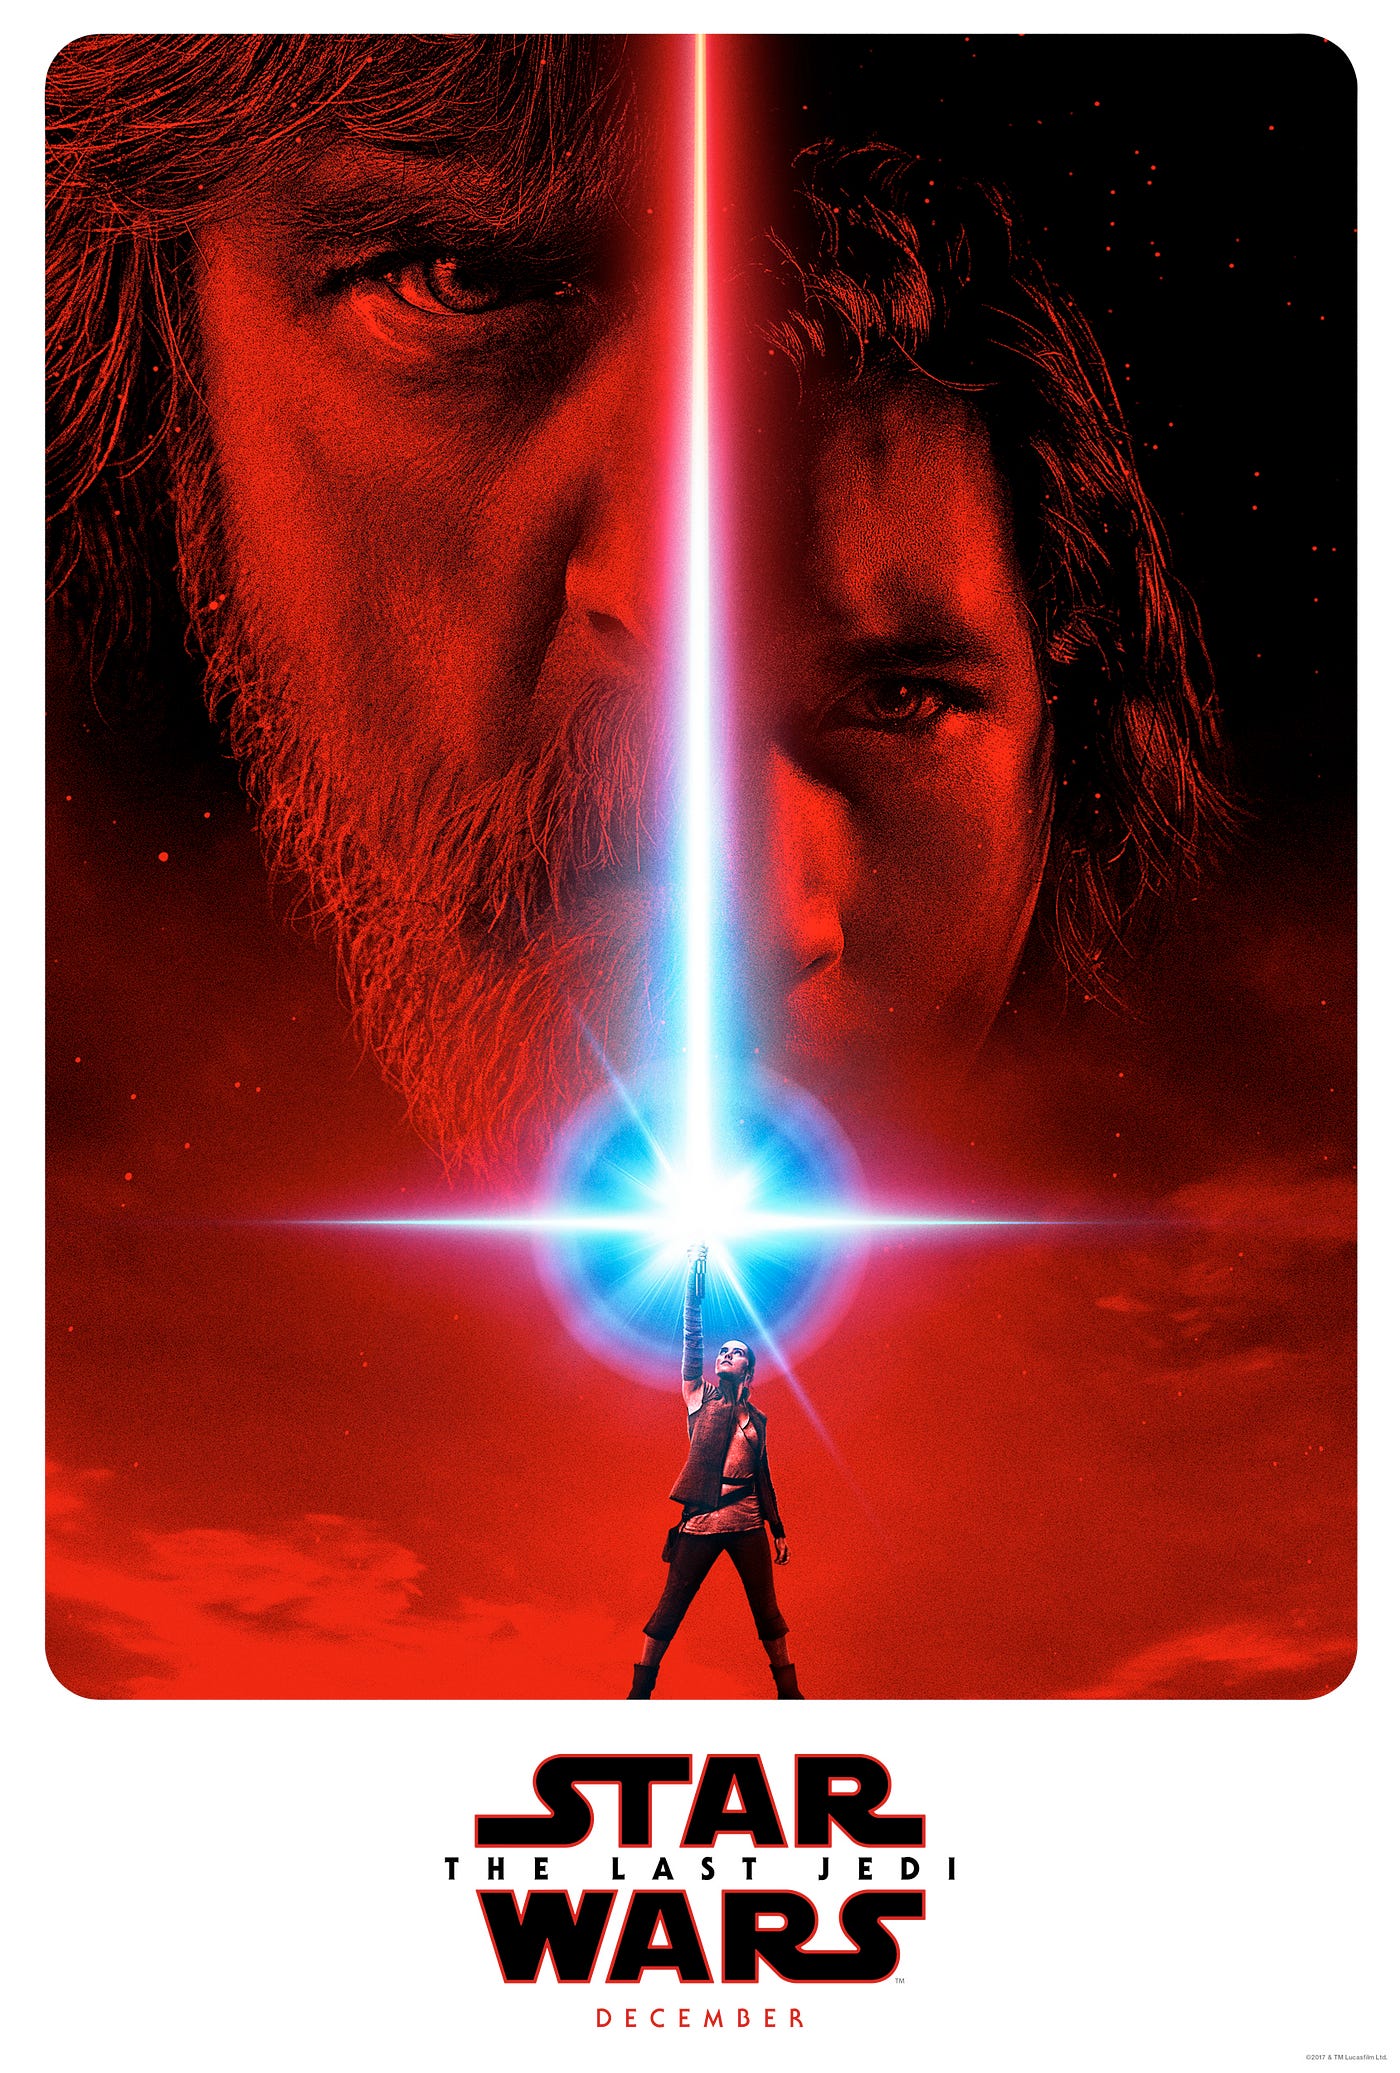 Star Wars: The Last Jedi Review. Rian Johnson presents viewers with the…, by Zachary Taylor